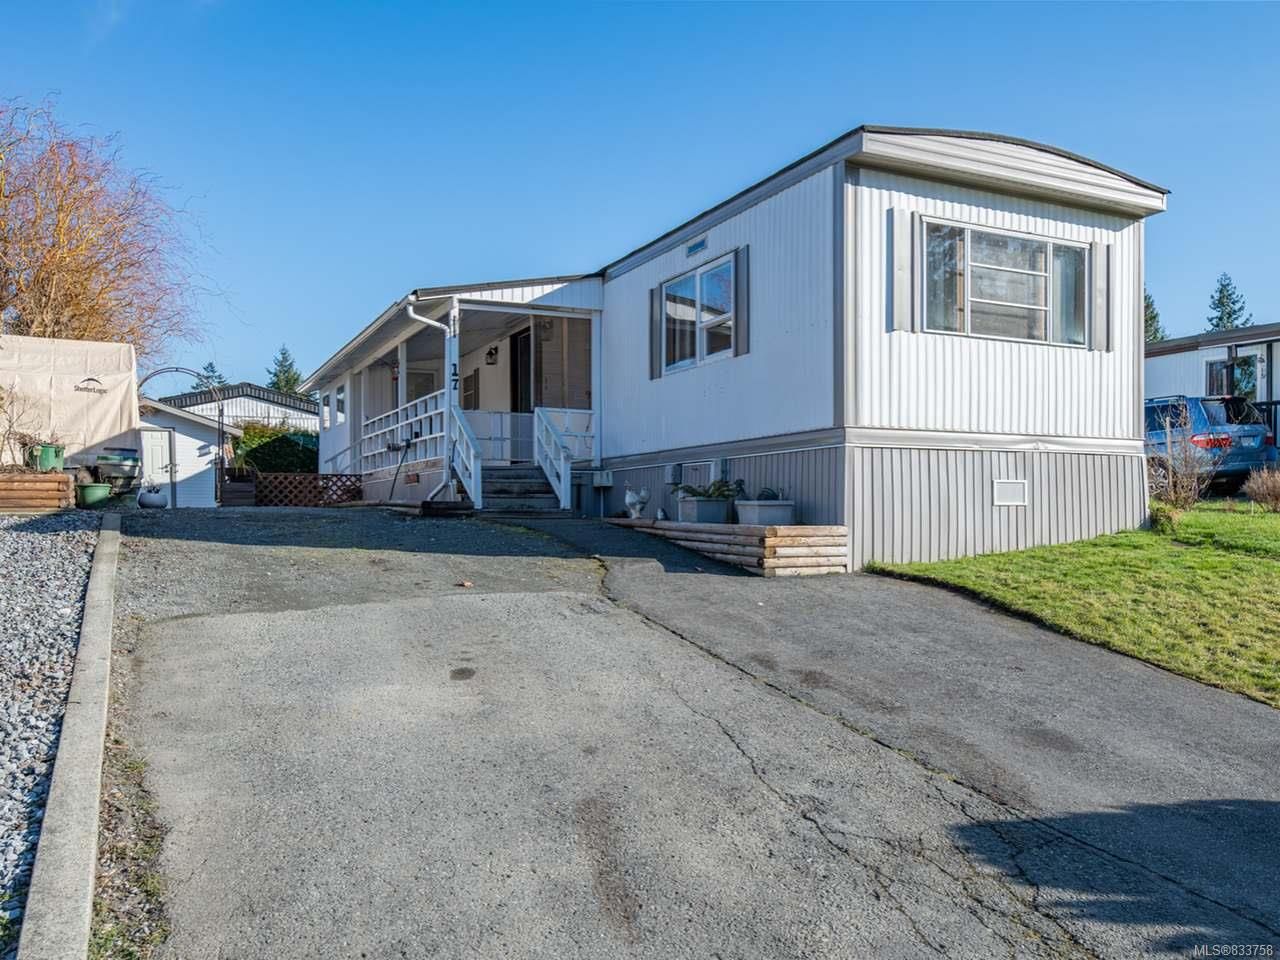 Main Photo: 17 61 12th St in NANAIMO: Na Chase River Manufactured Home for sale (Nanaimo)  : MLS®# 833758